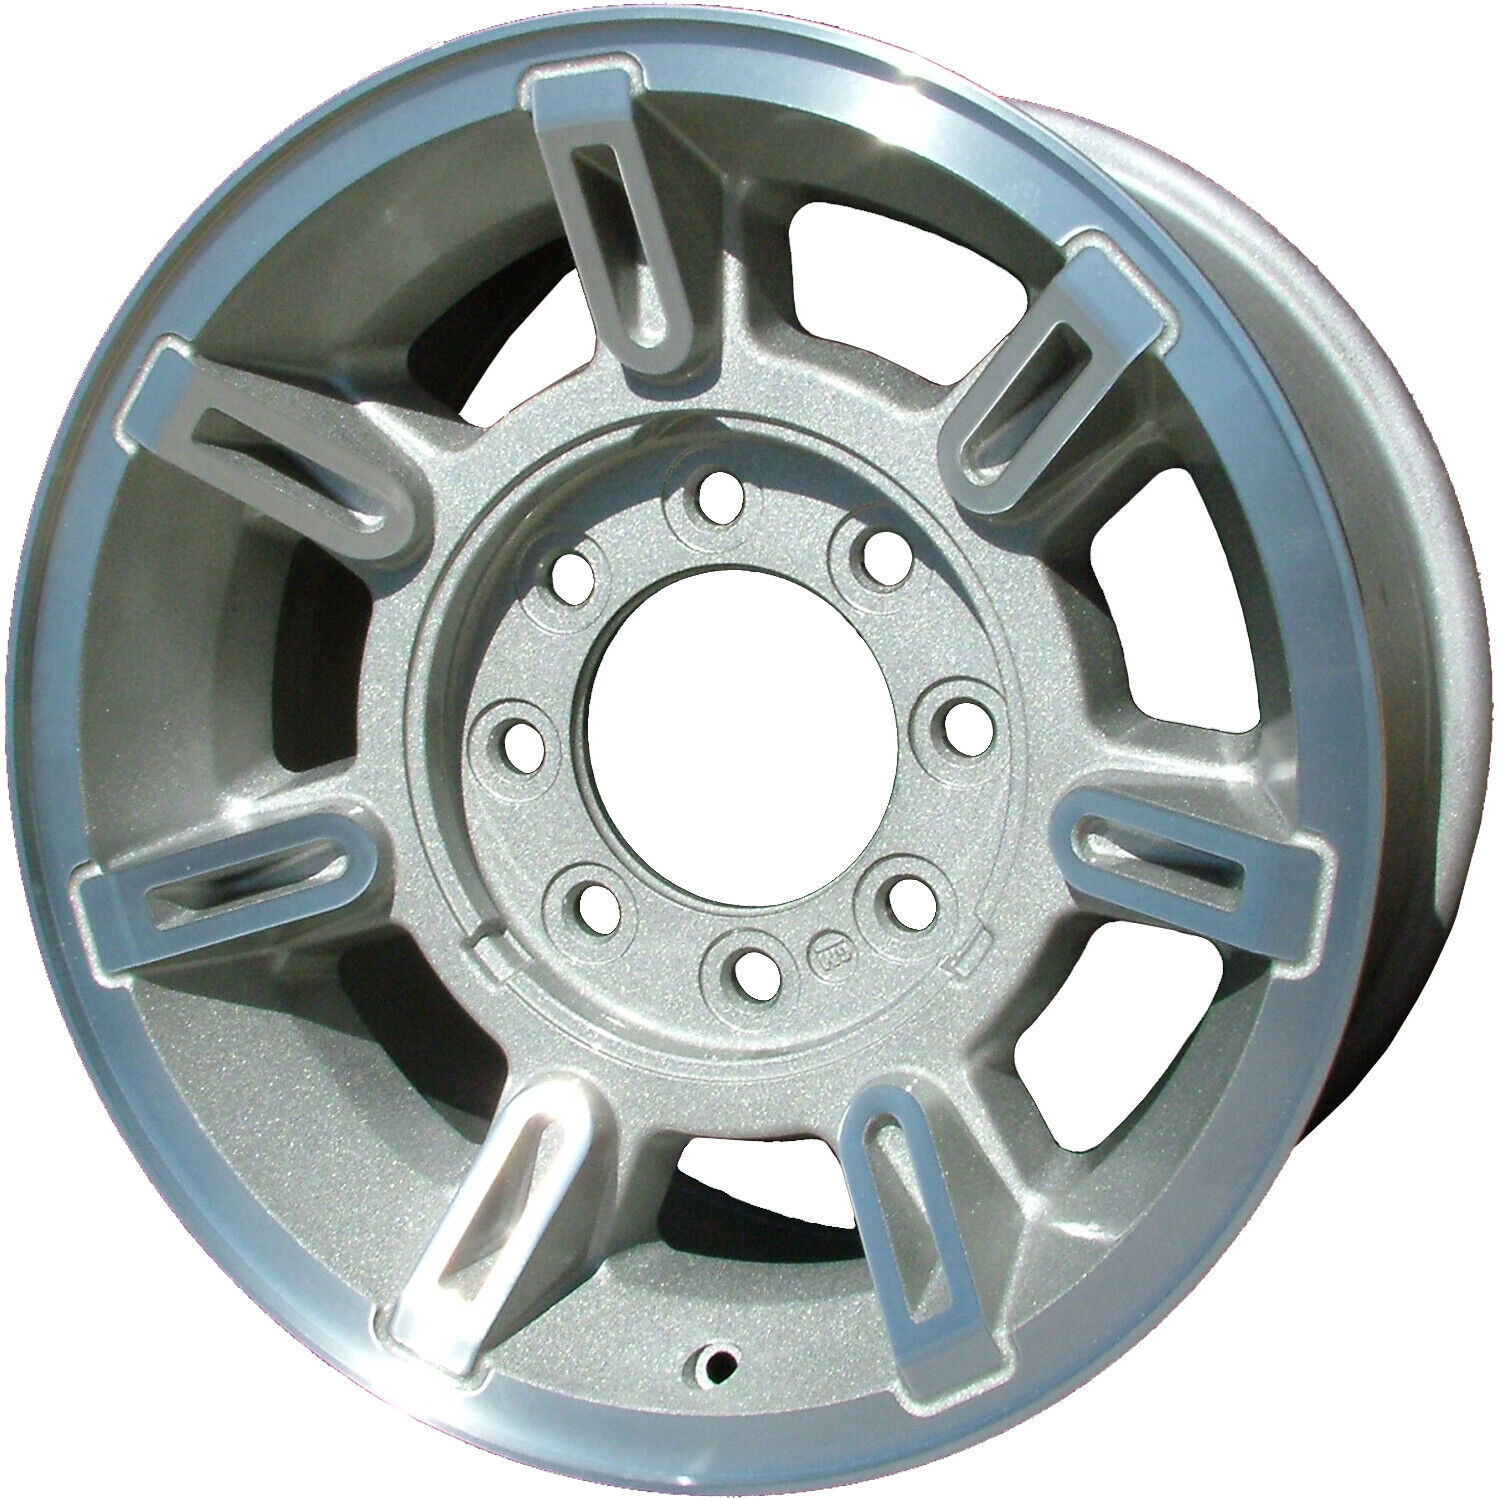 06300 Reconditioned OEM Aluminum Wheel 17x8.5 fits 2003-2007 Hummer H2